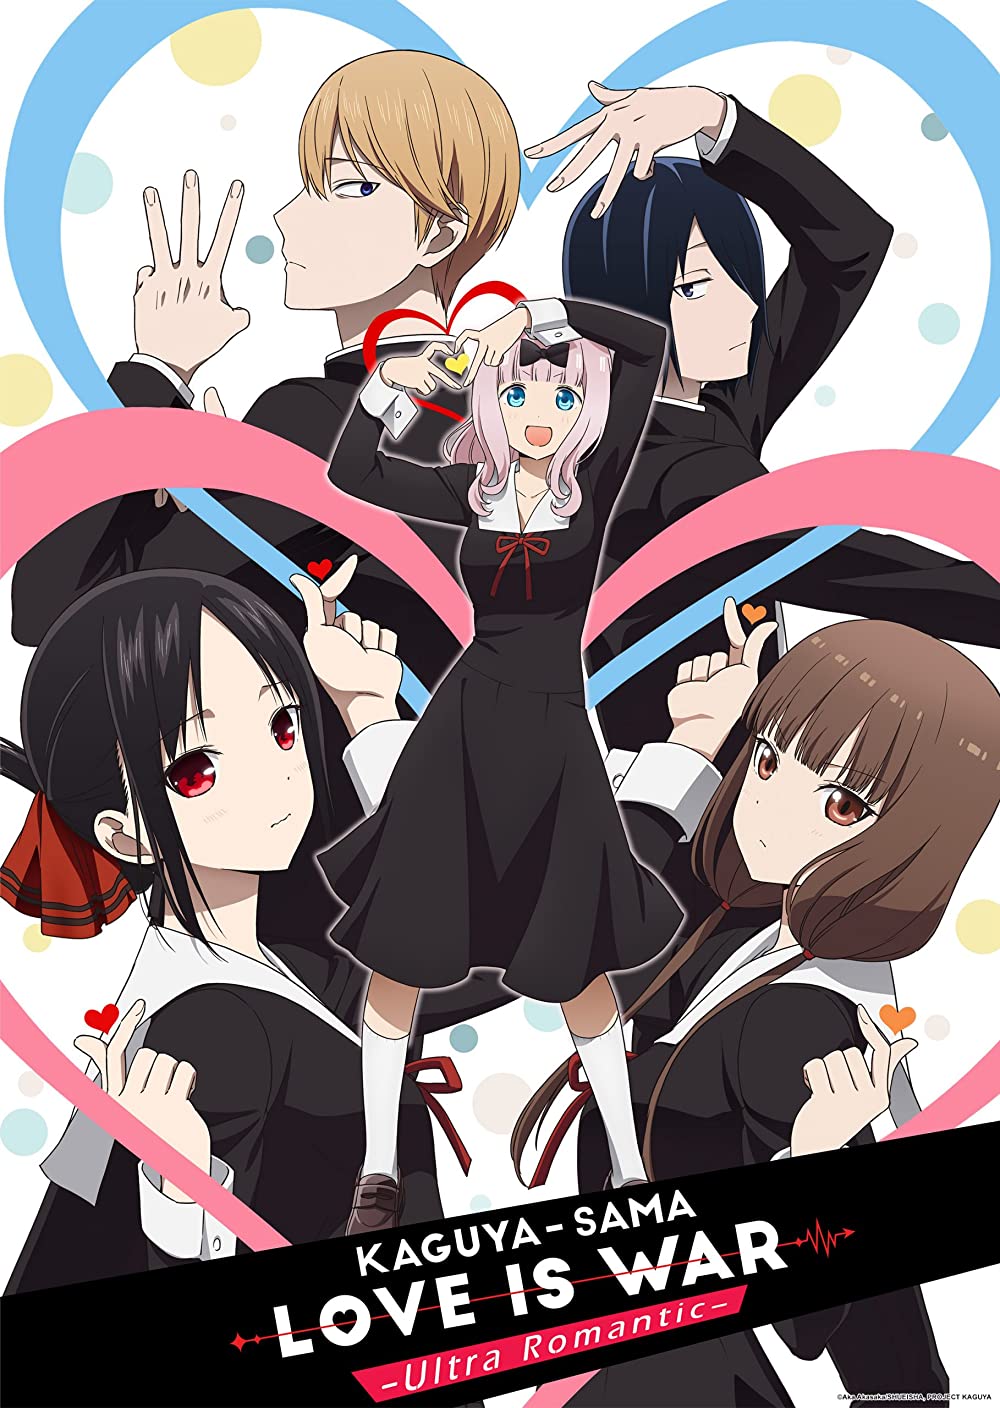 6 Recommendations for Romance Anime about First Love, Including HORIMIYA -  KAGUYA-SAMA: LOVE IS WAR